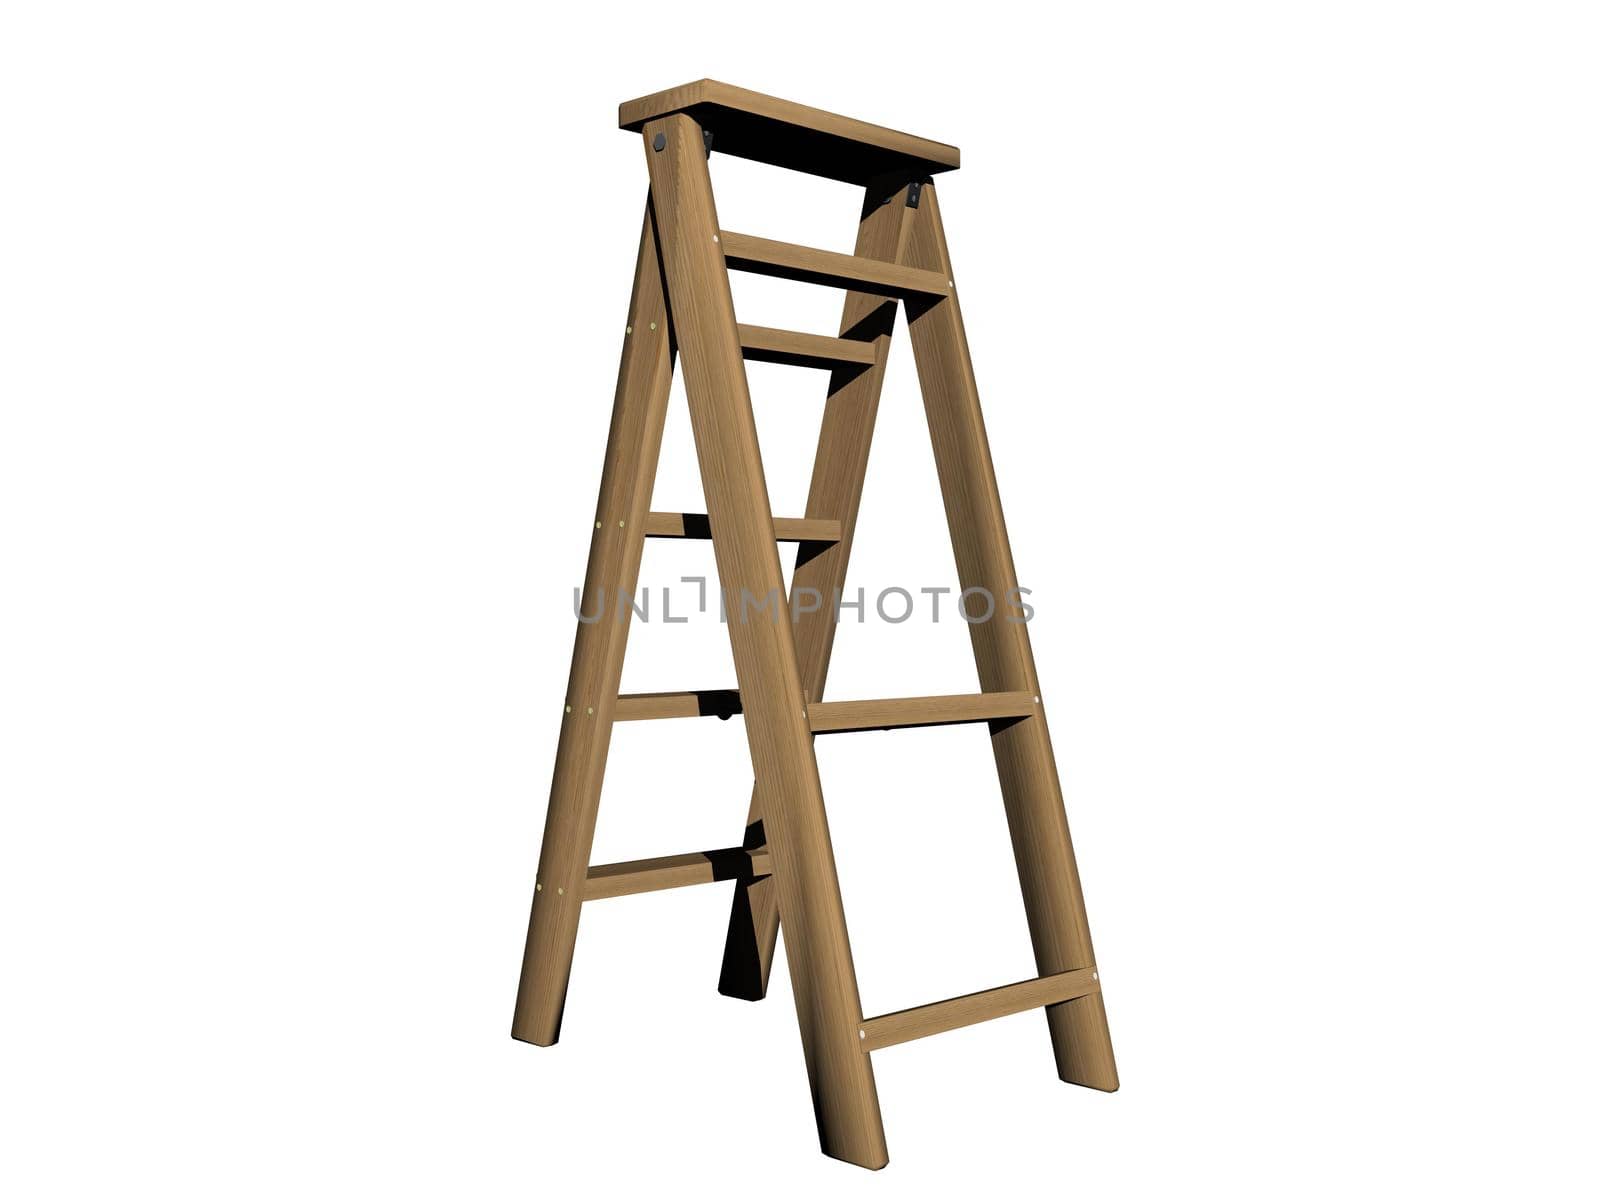 Brown ladder on white background - 3d rendering by mariephotos